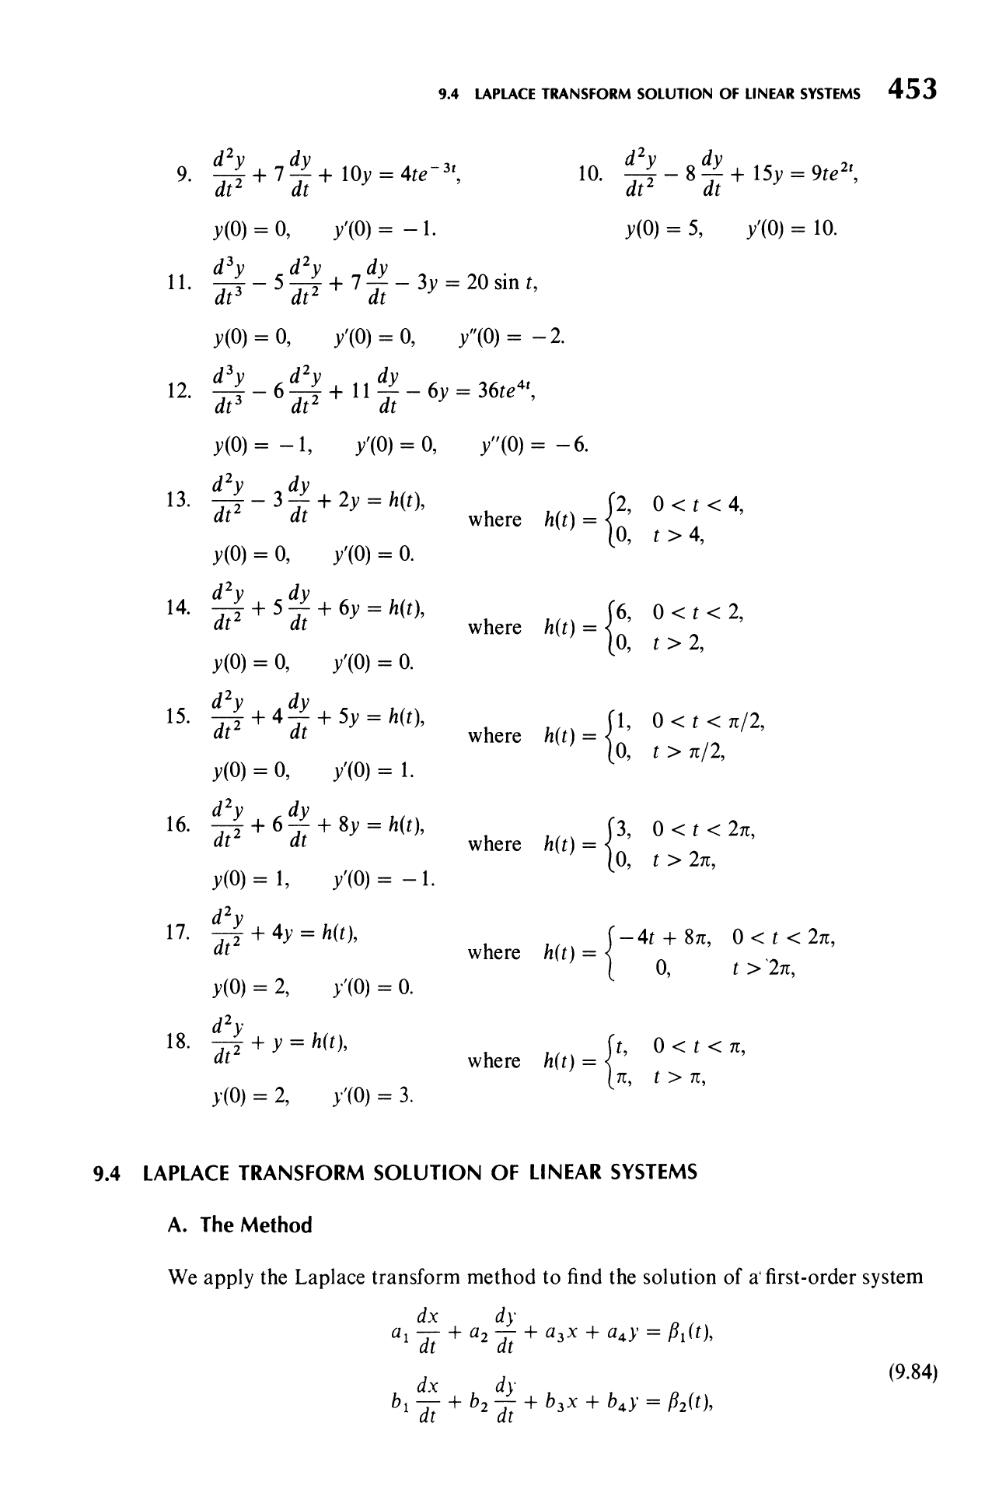 9.4  Laplace Transform Solution of Linear Systems